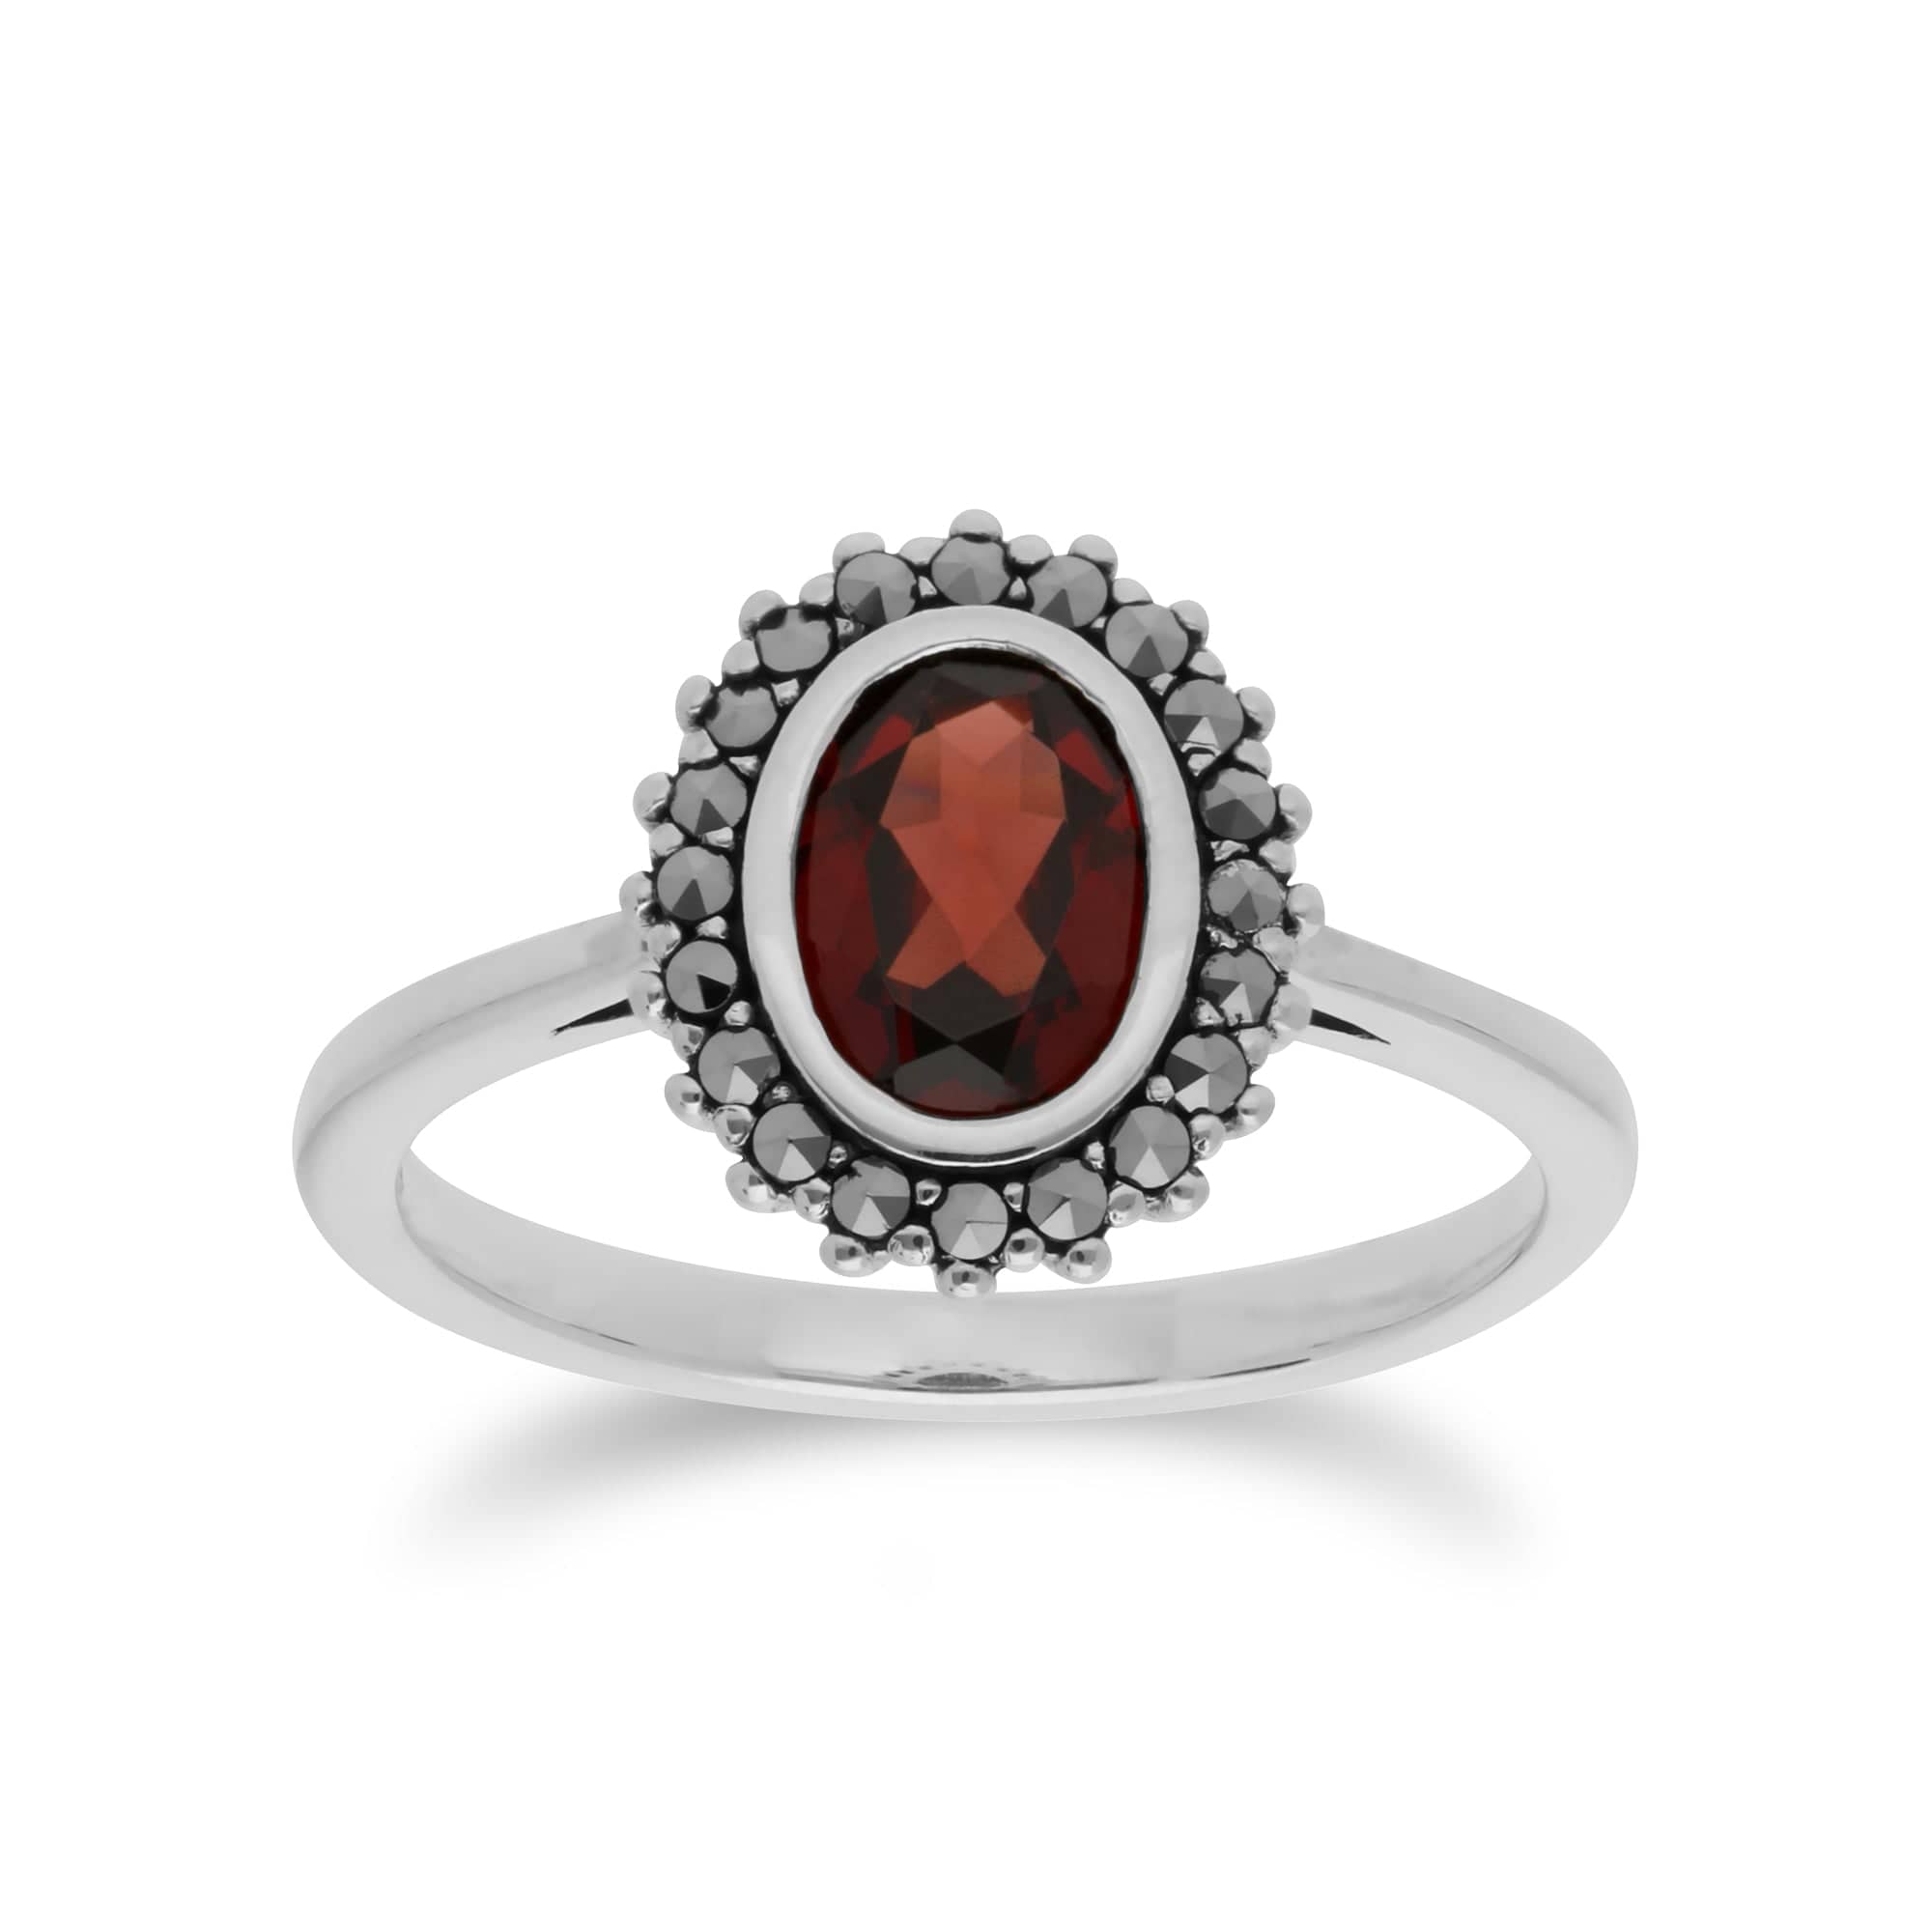 214R599703925 Art Deco Style Oval Garnet & Marcasite Halo Ring in 925 Sterling Silver 1